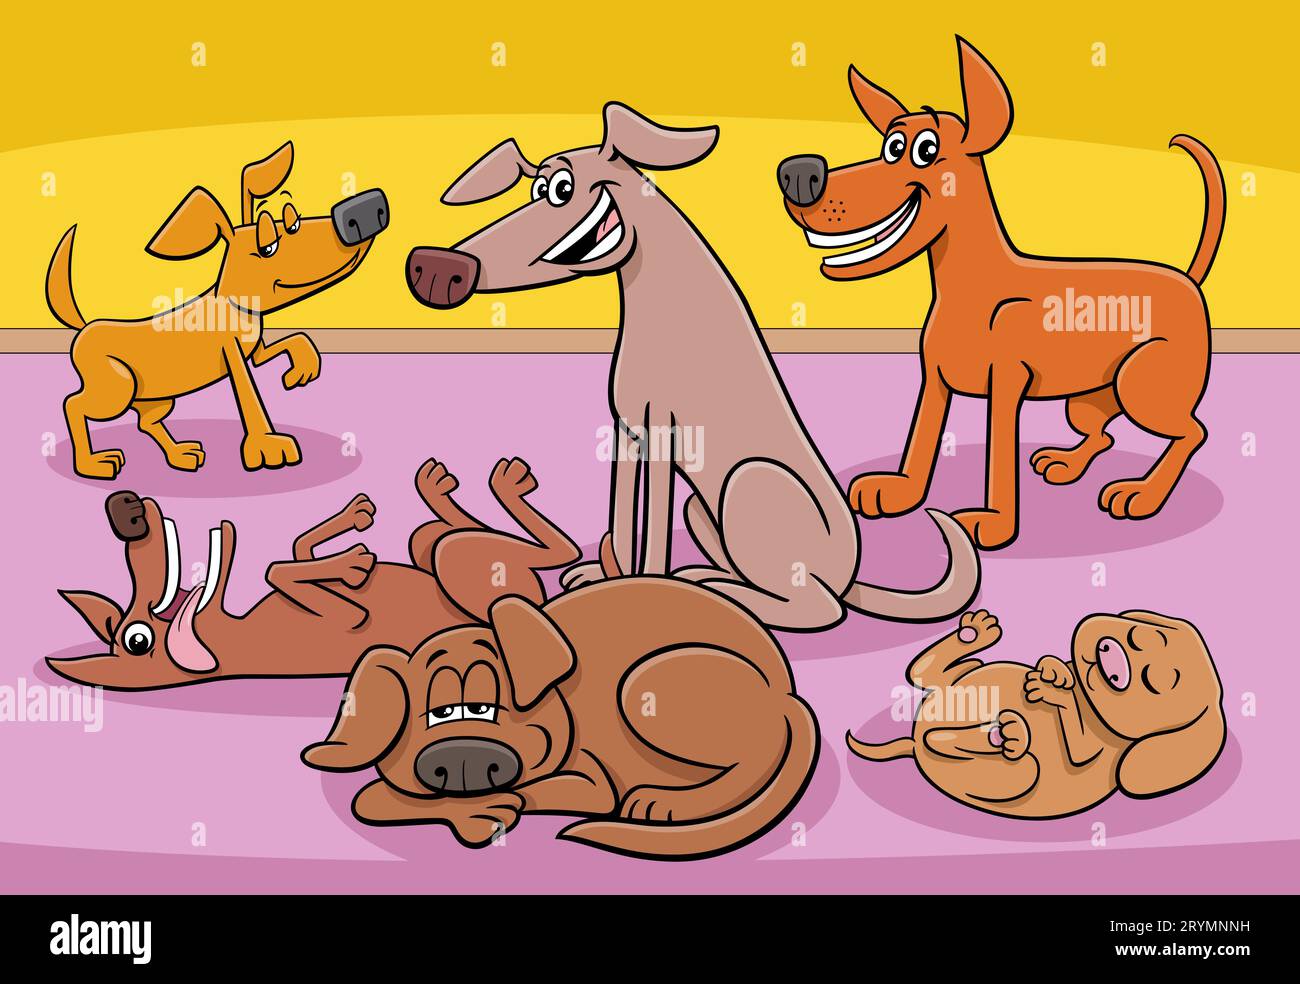 Cartoon illustration of funny dogs and puppies animal characters group at home Stock Photo